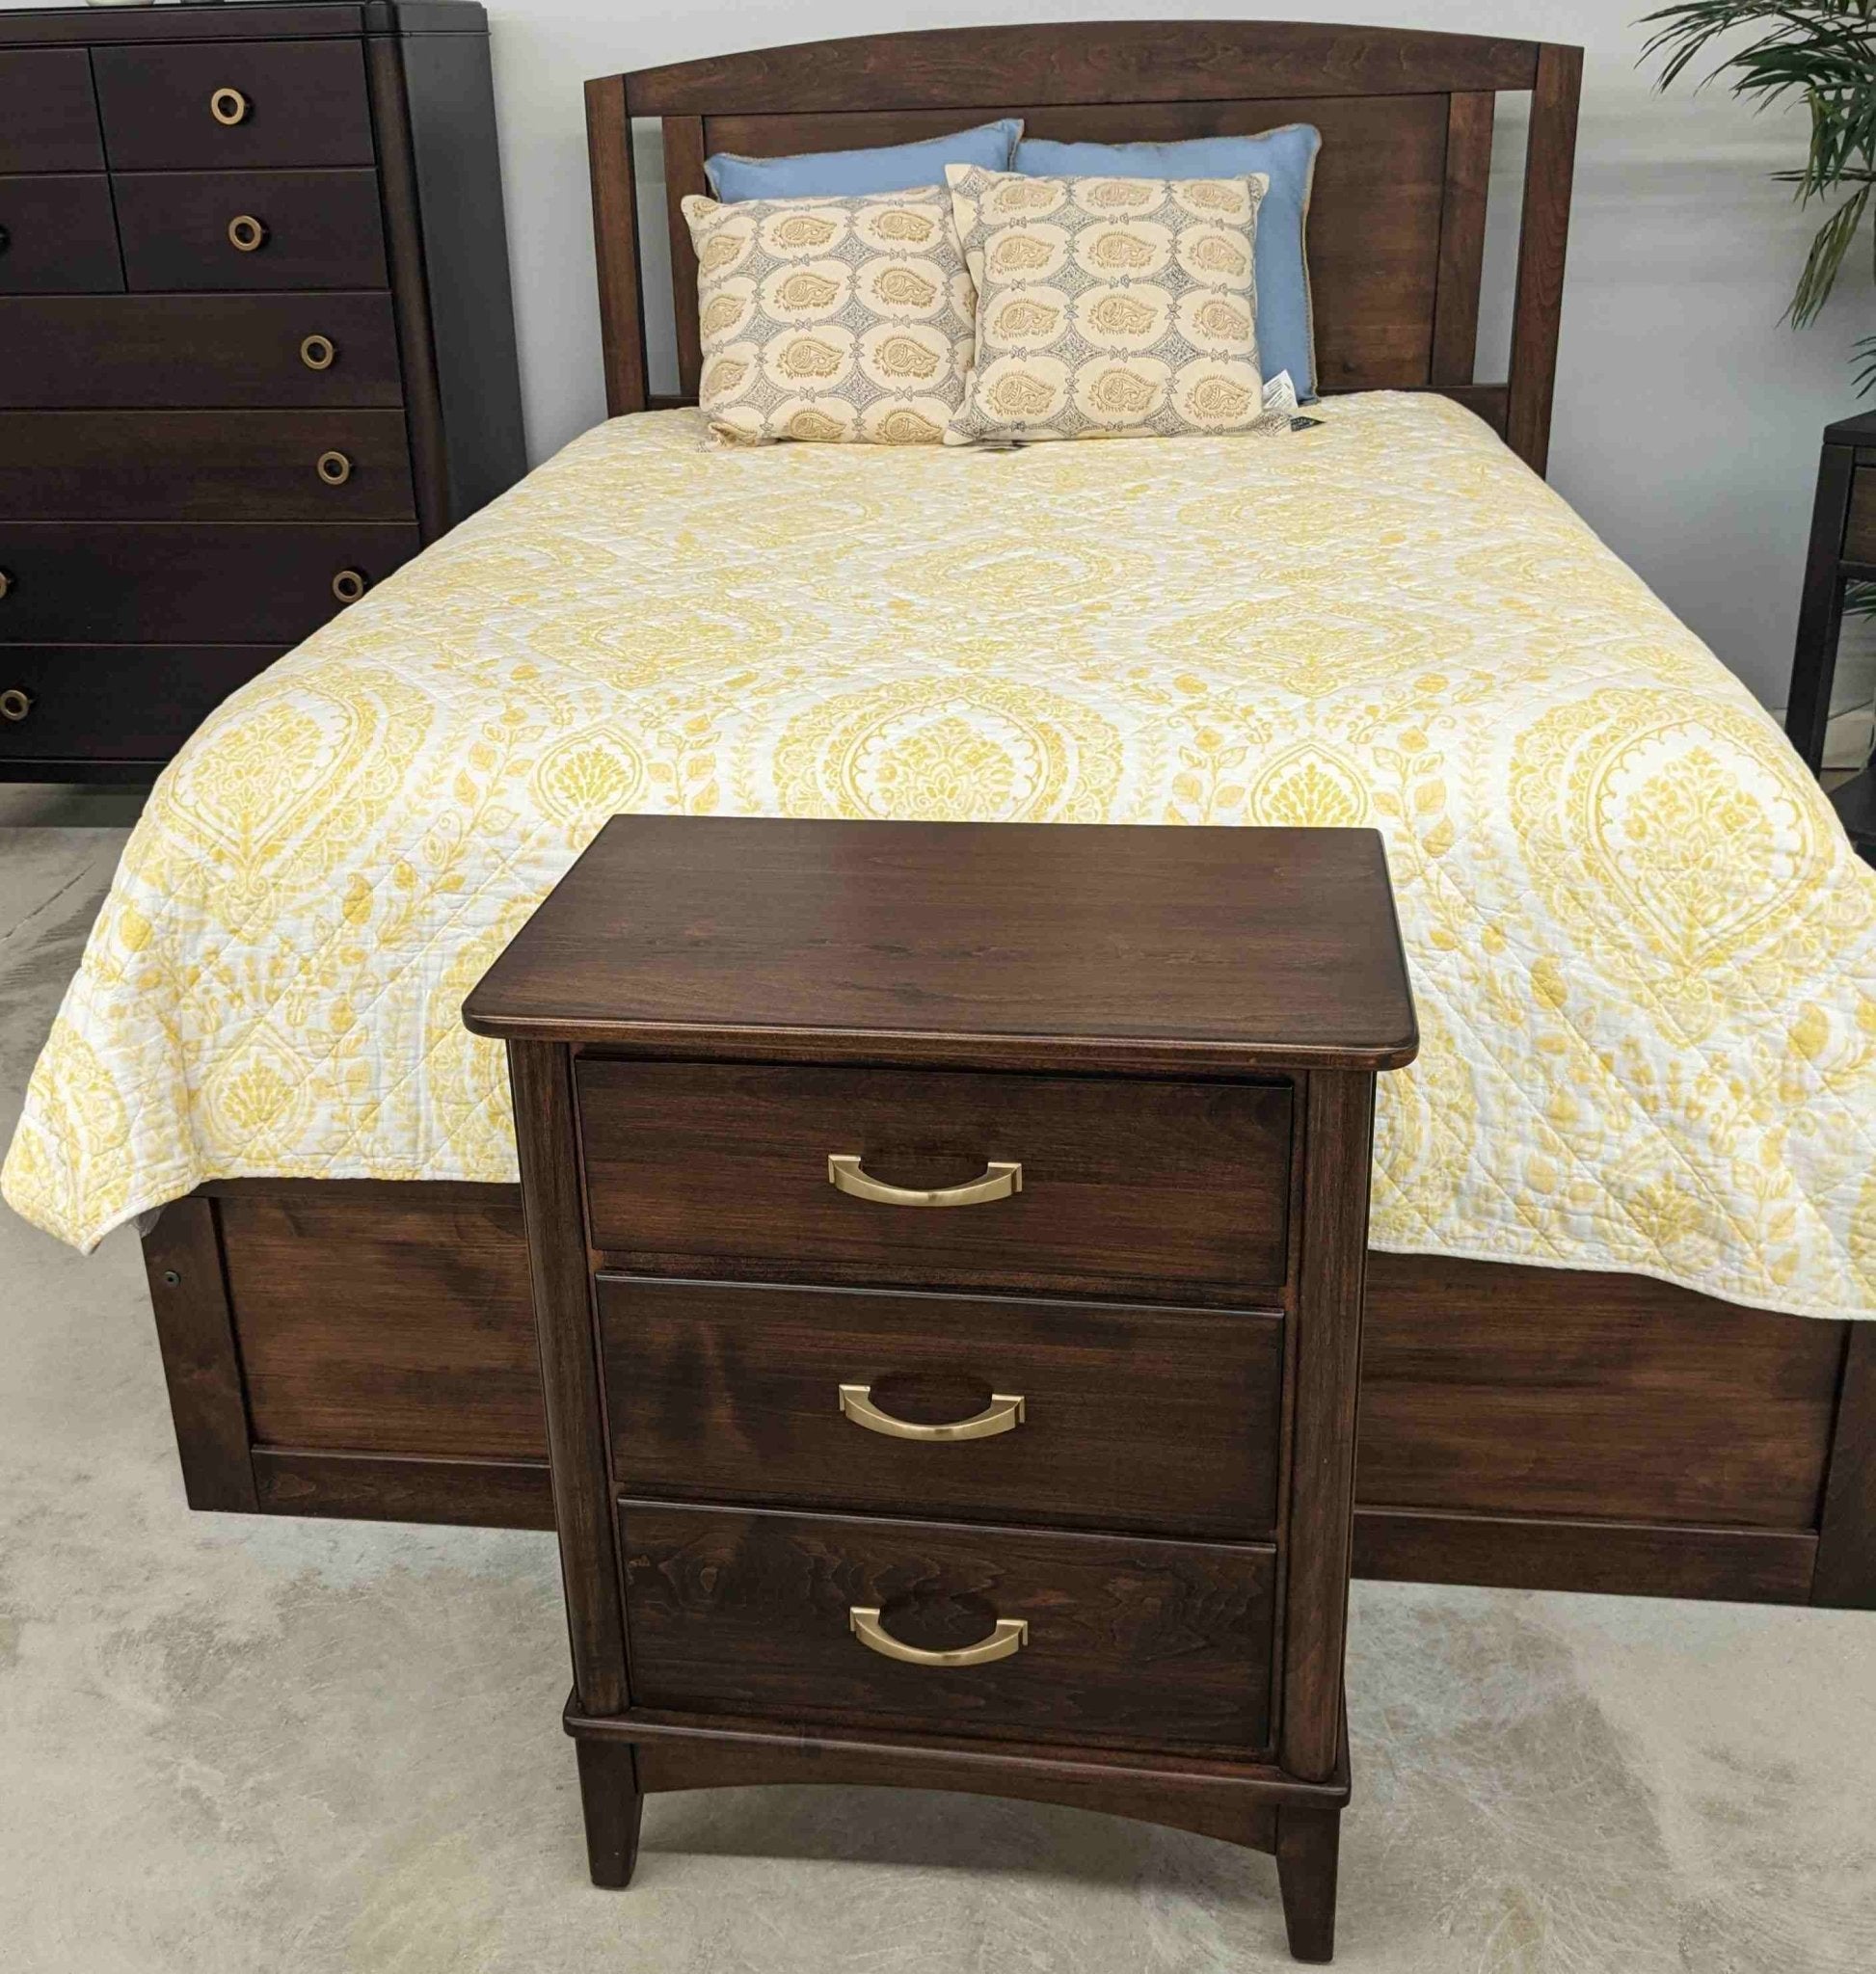 Deco Storage Bed Set l In-Stock - snyders.furniture